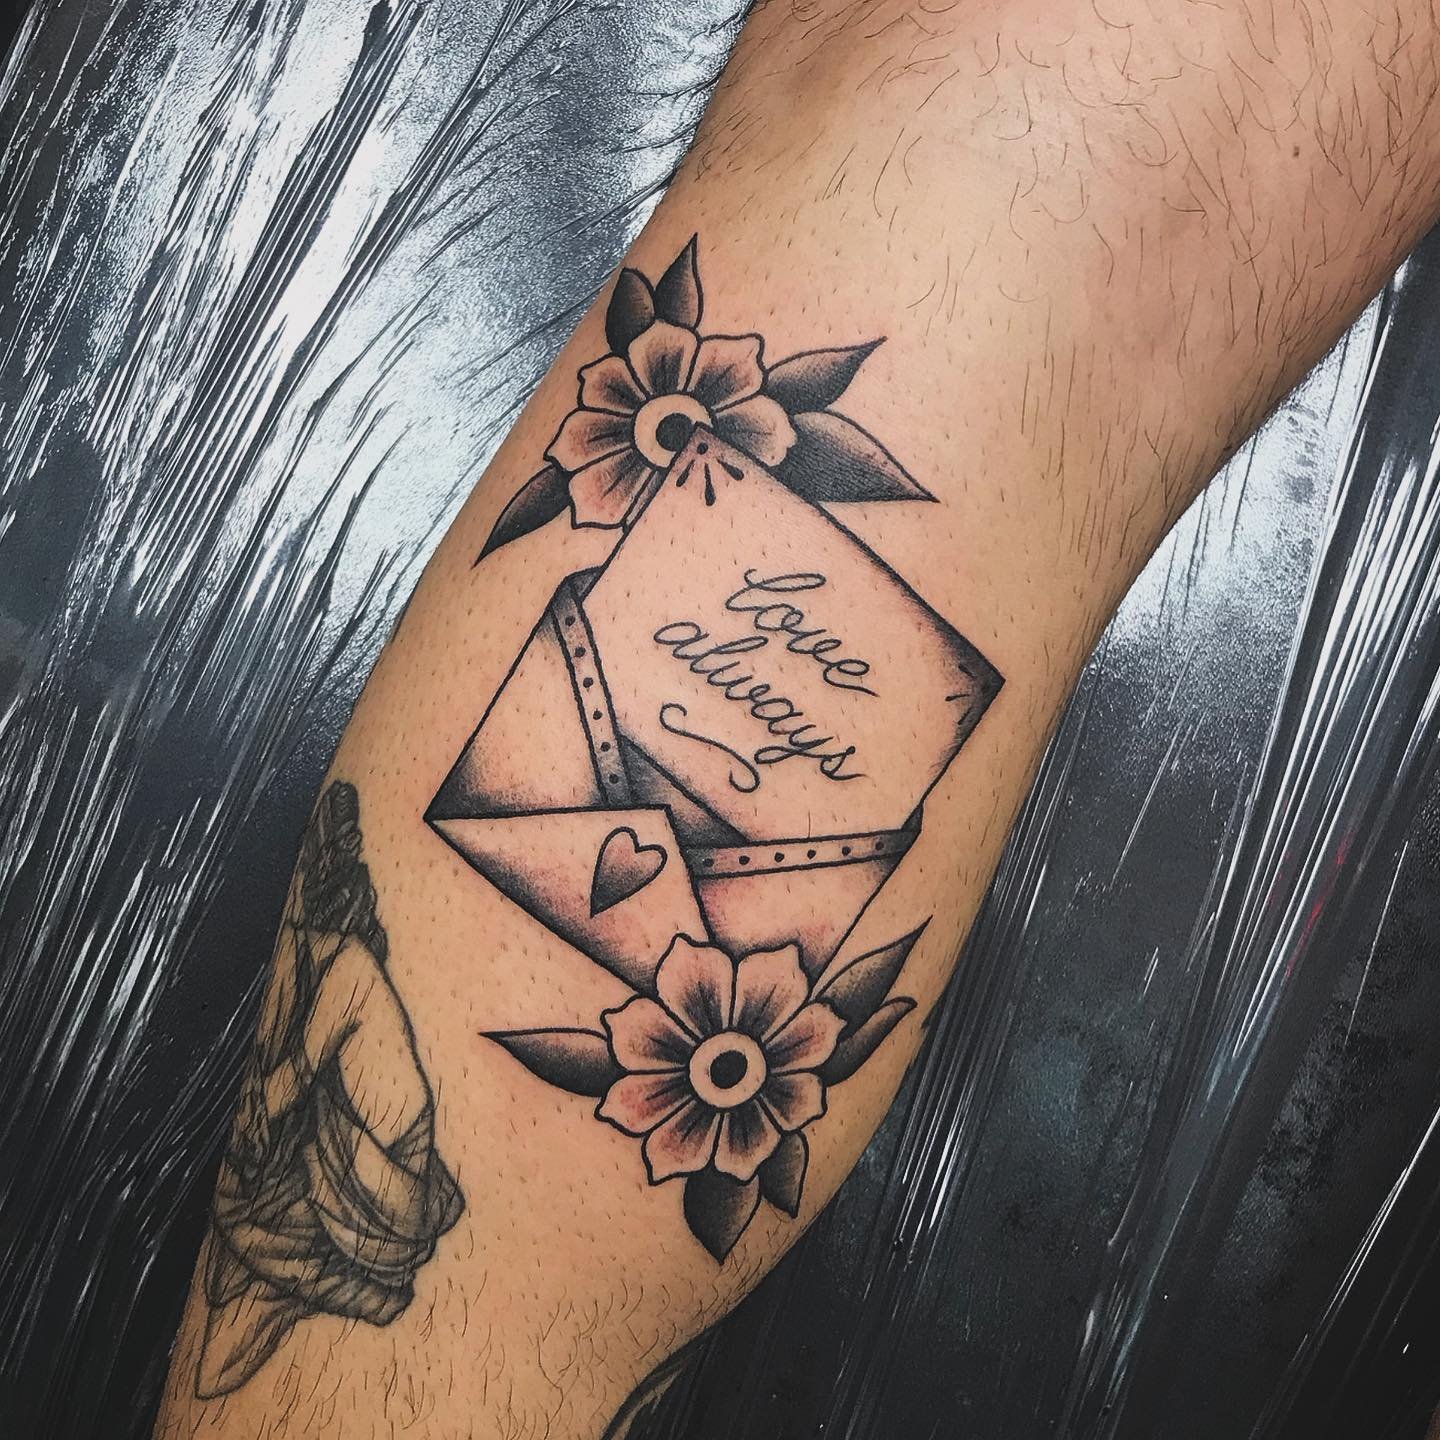 Love always, for @jake_james_f 💌
Thankyou so much mate!
Made at @mans_ruin_tattoo, bookings available 🎈

#tradtattoo #envelope #dynamicink #melbournetattoo #melbournetattooist #traditionaltattoo #blacktattoos #bishoprotary